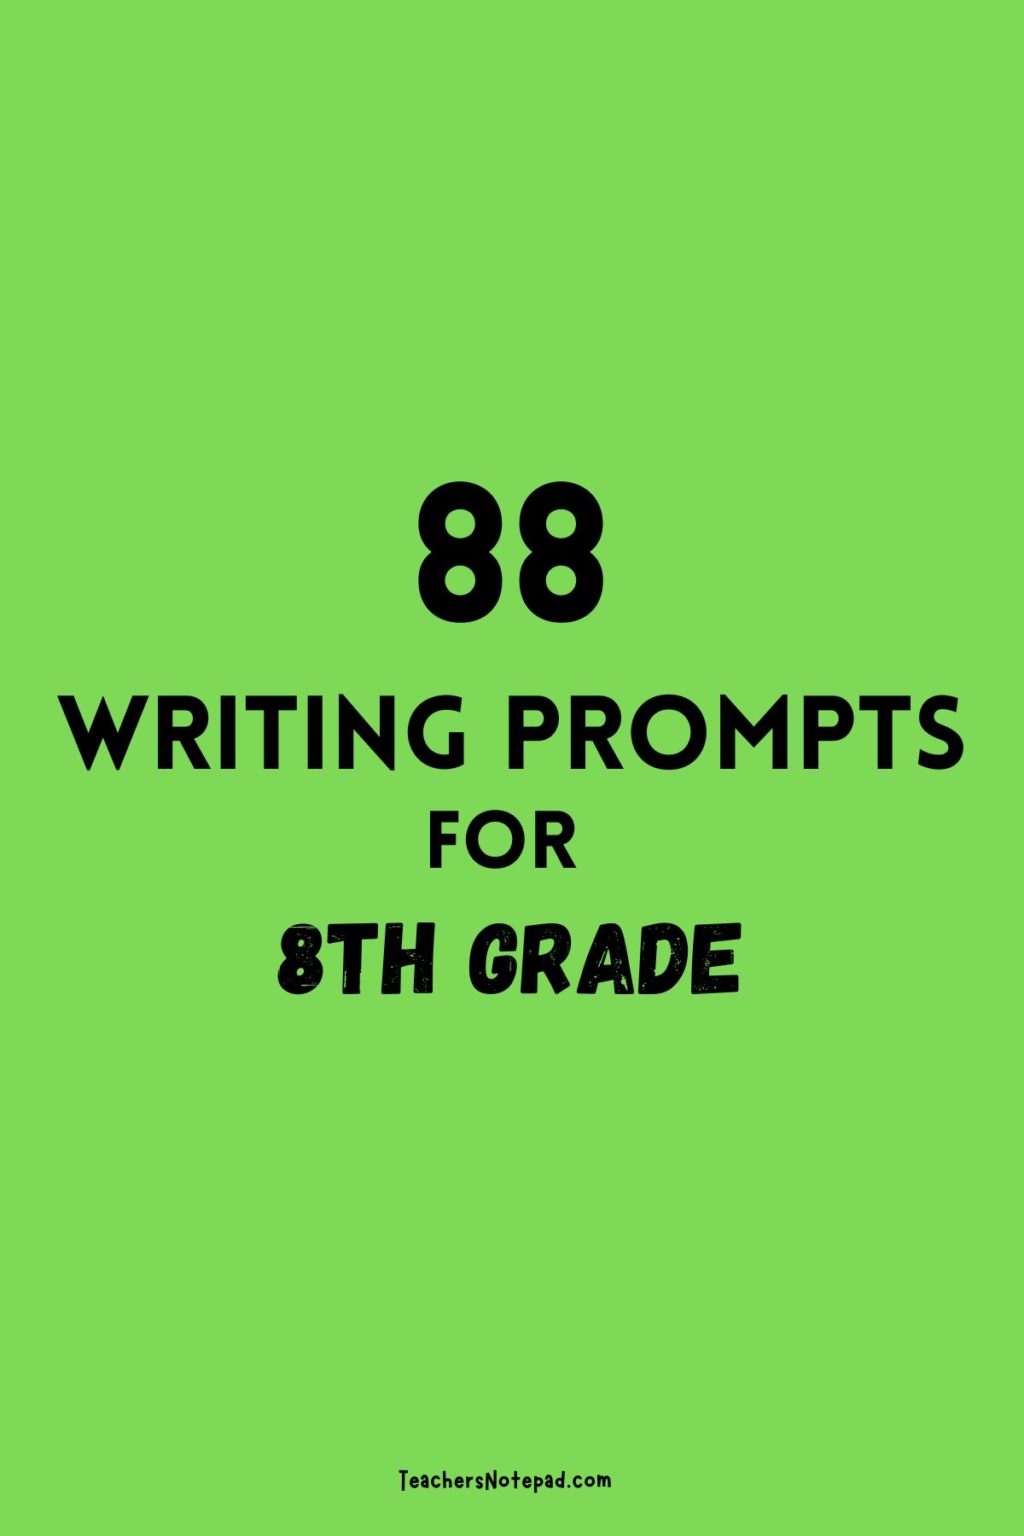 writing prompts for 8th grade students